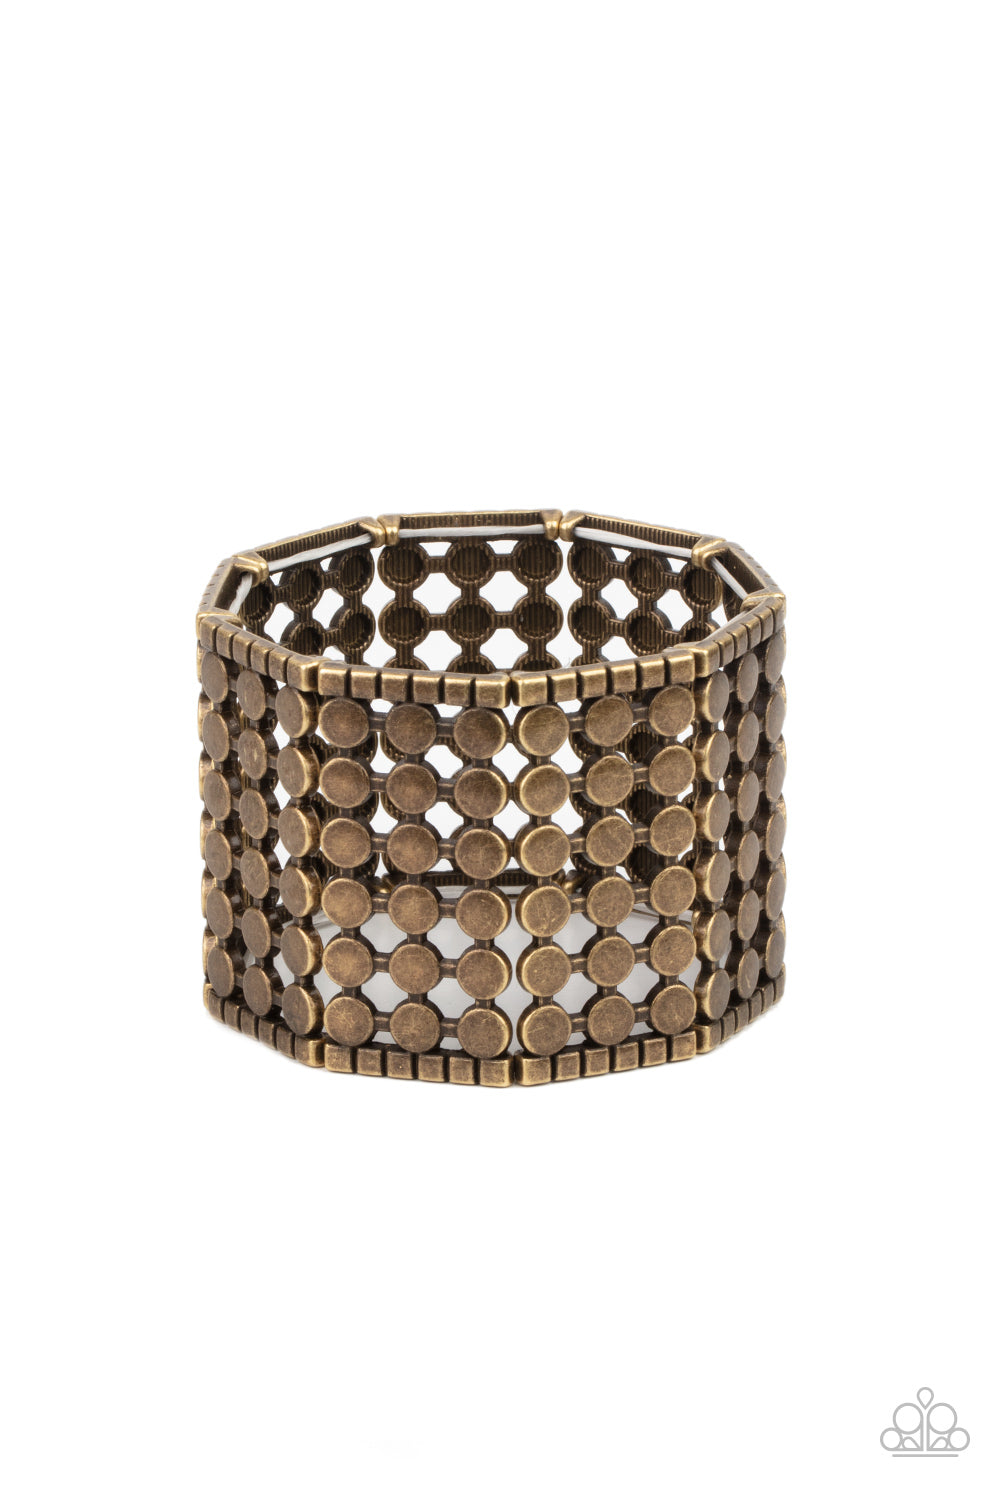 Cool and CONNECTED - Brass Bracelet - Princess Glam Shop